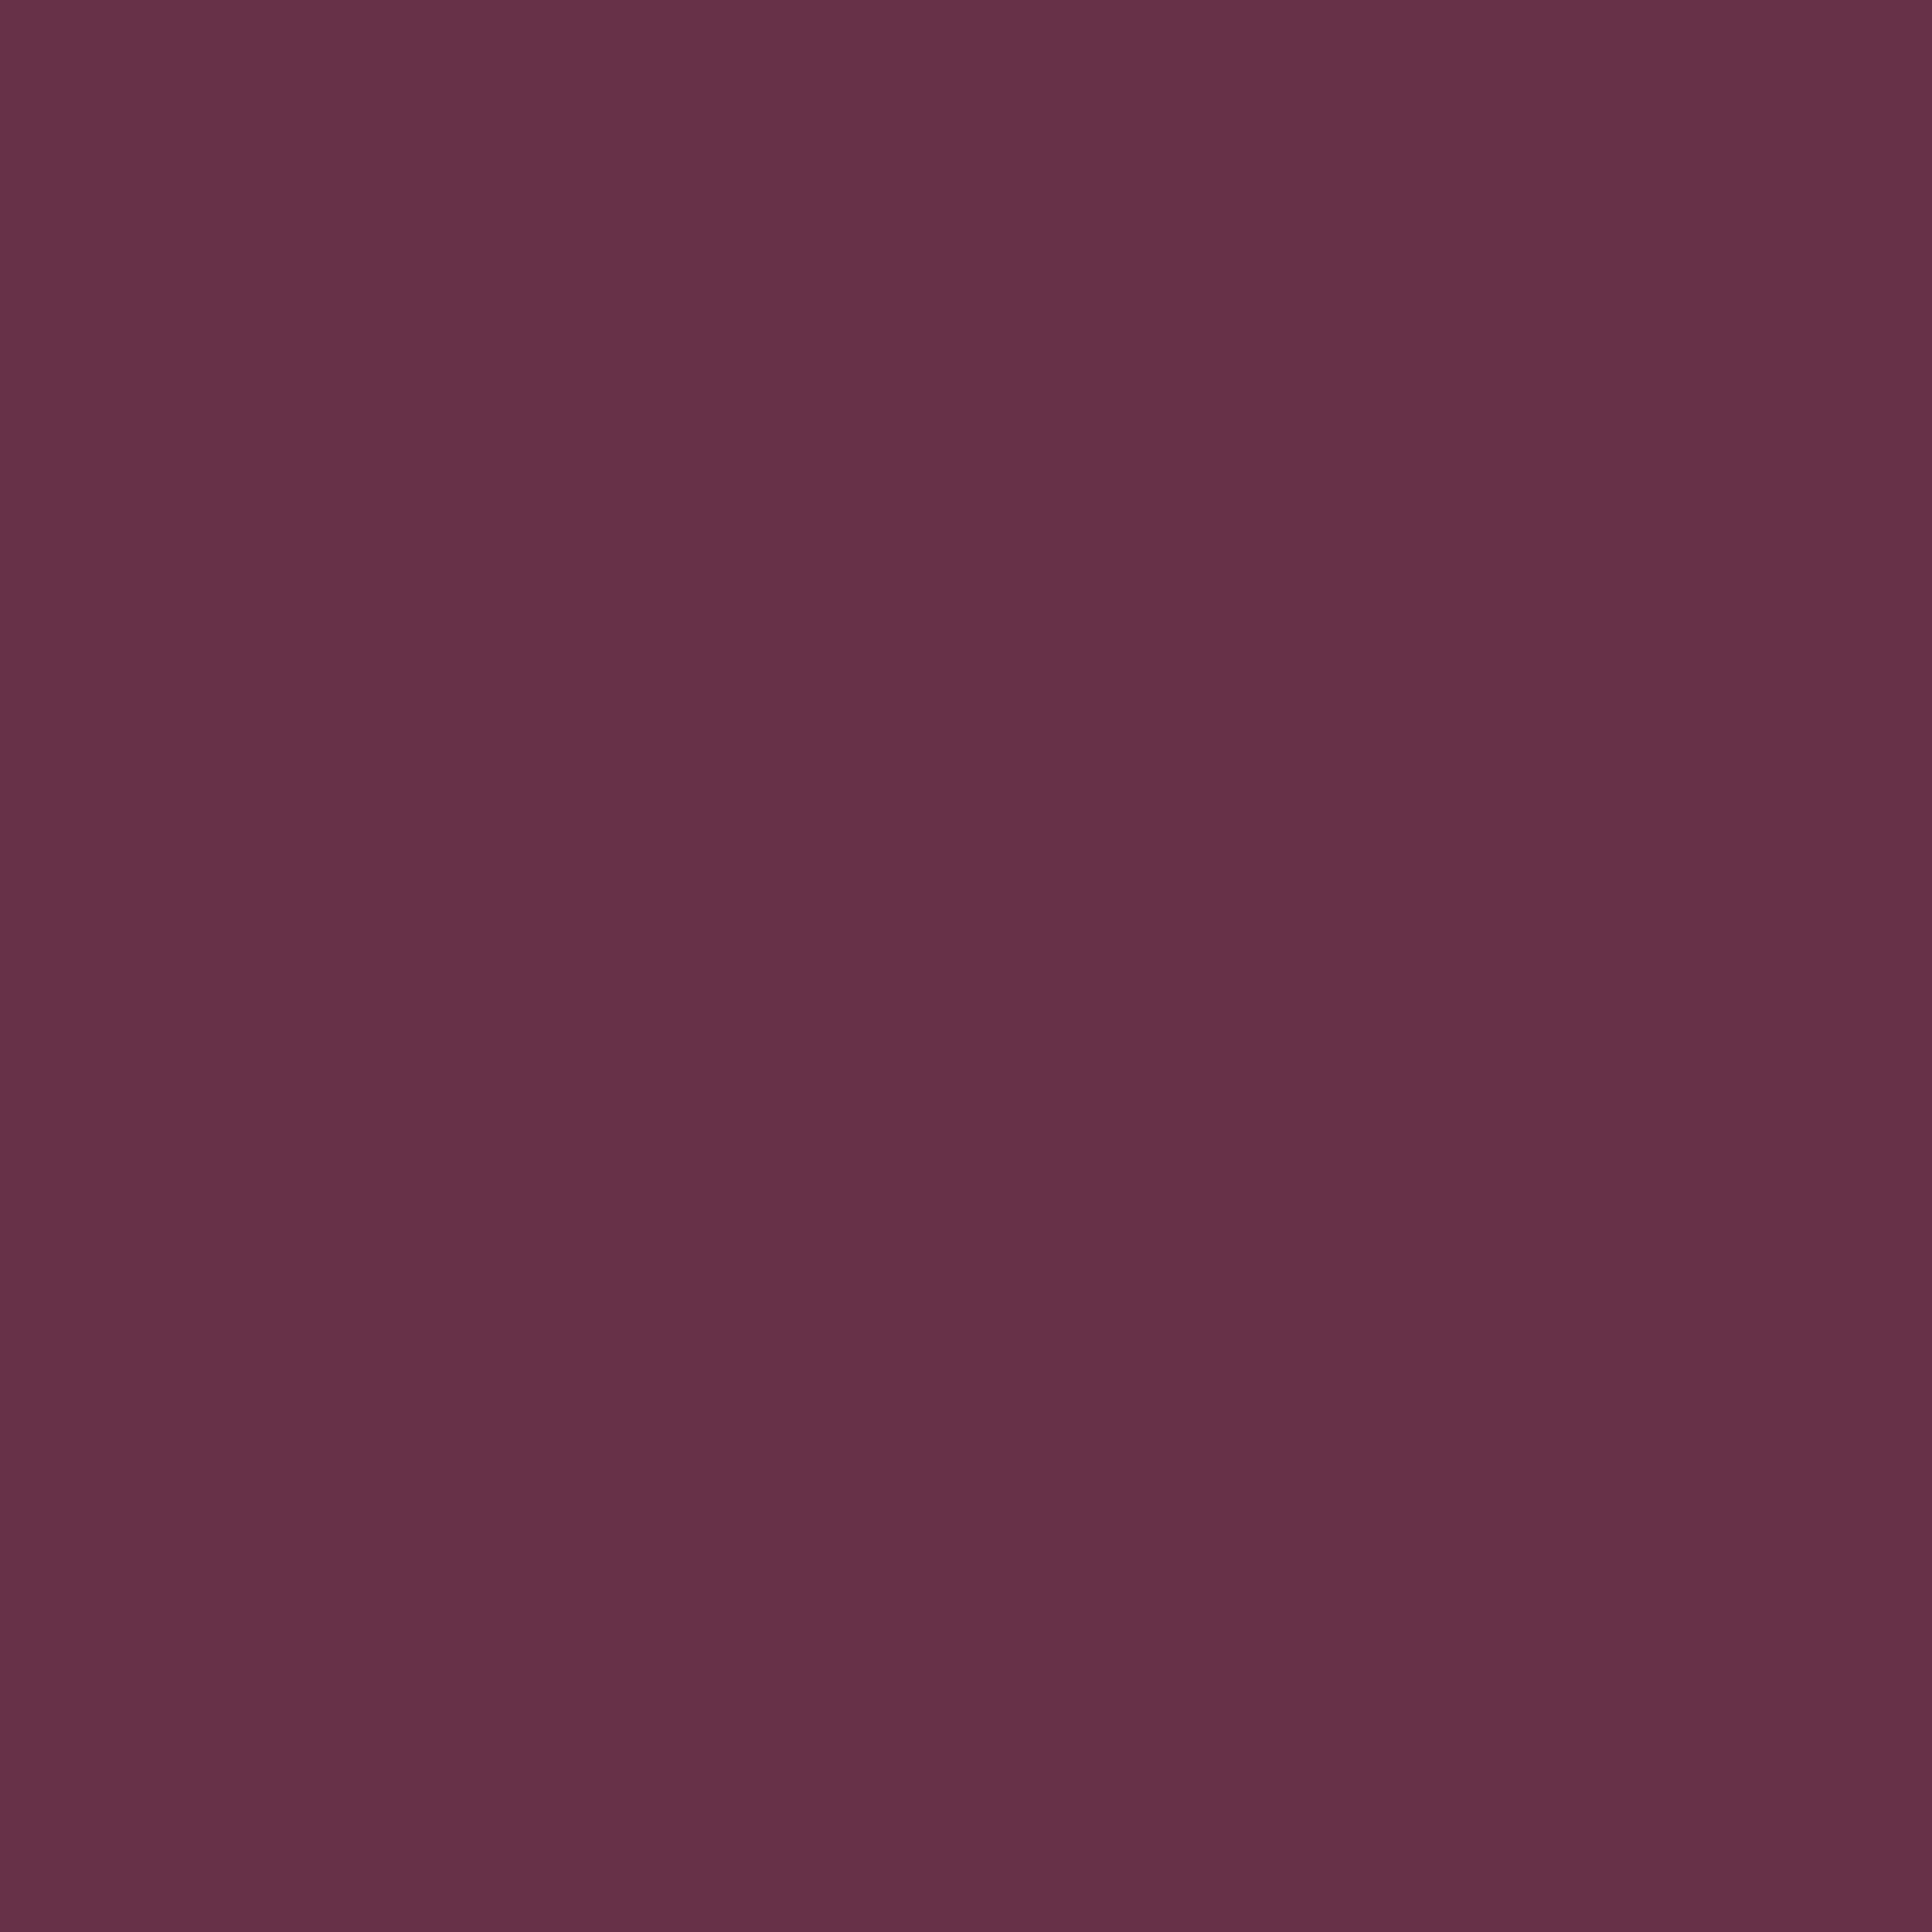 2732x2732 Wine Dregs Solid Color Background